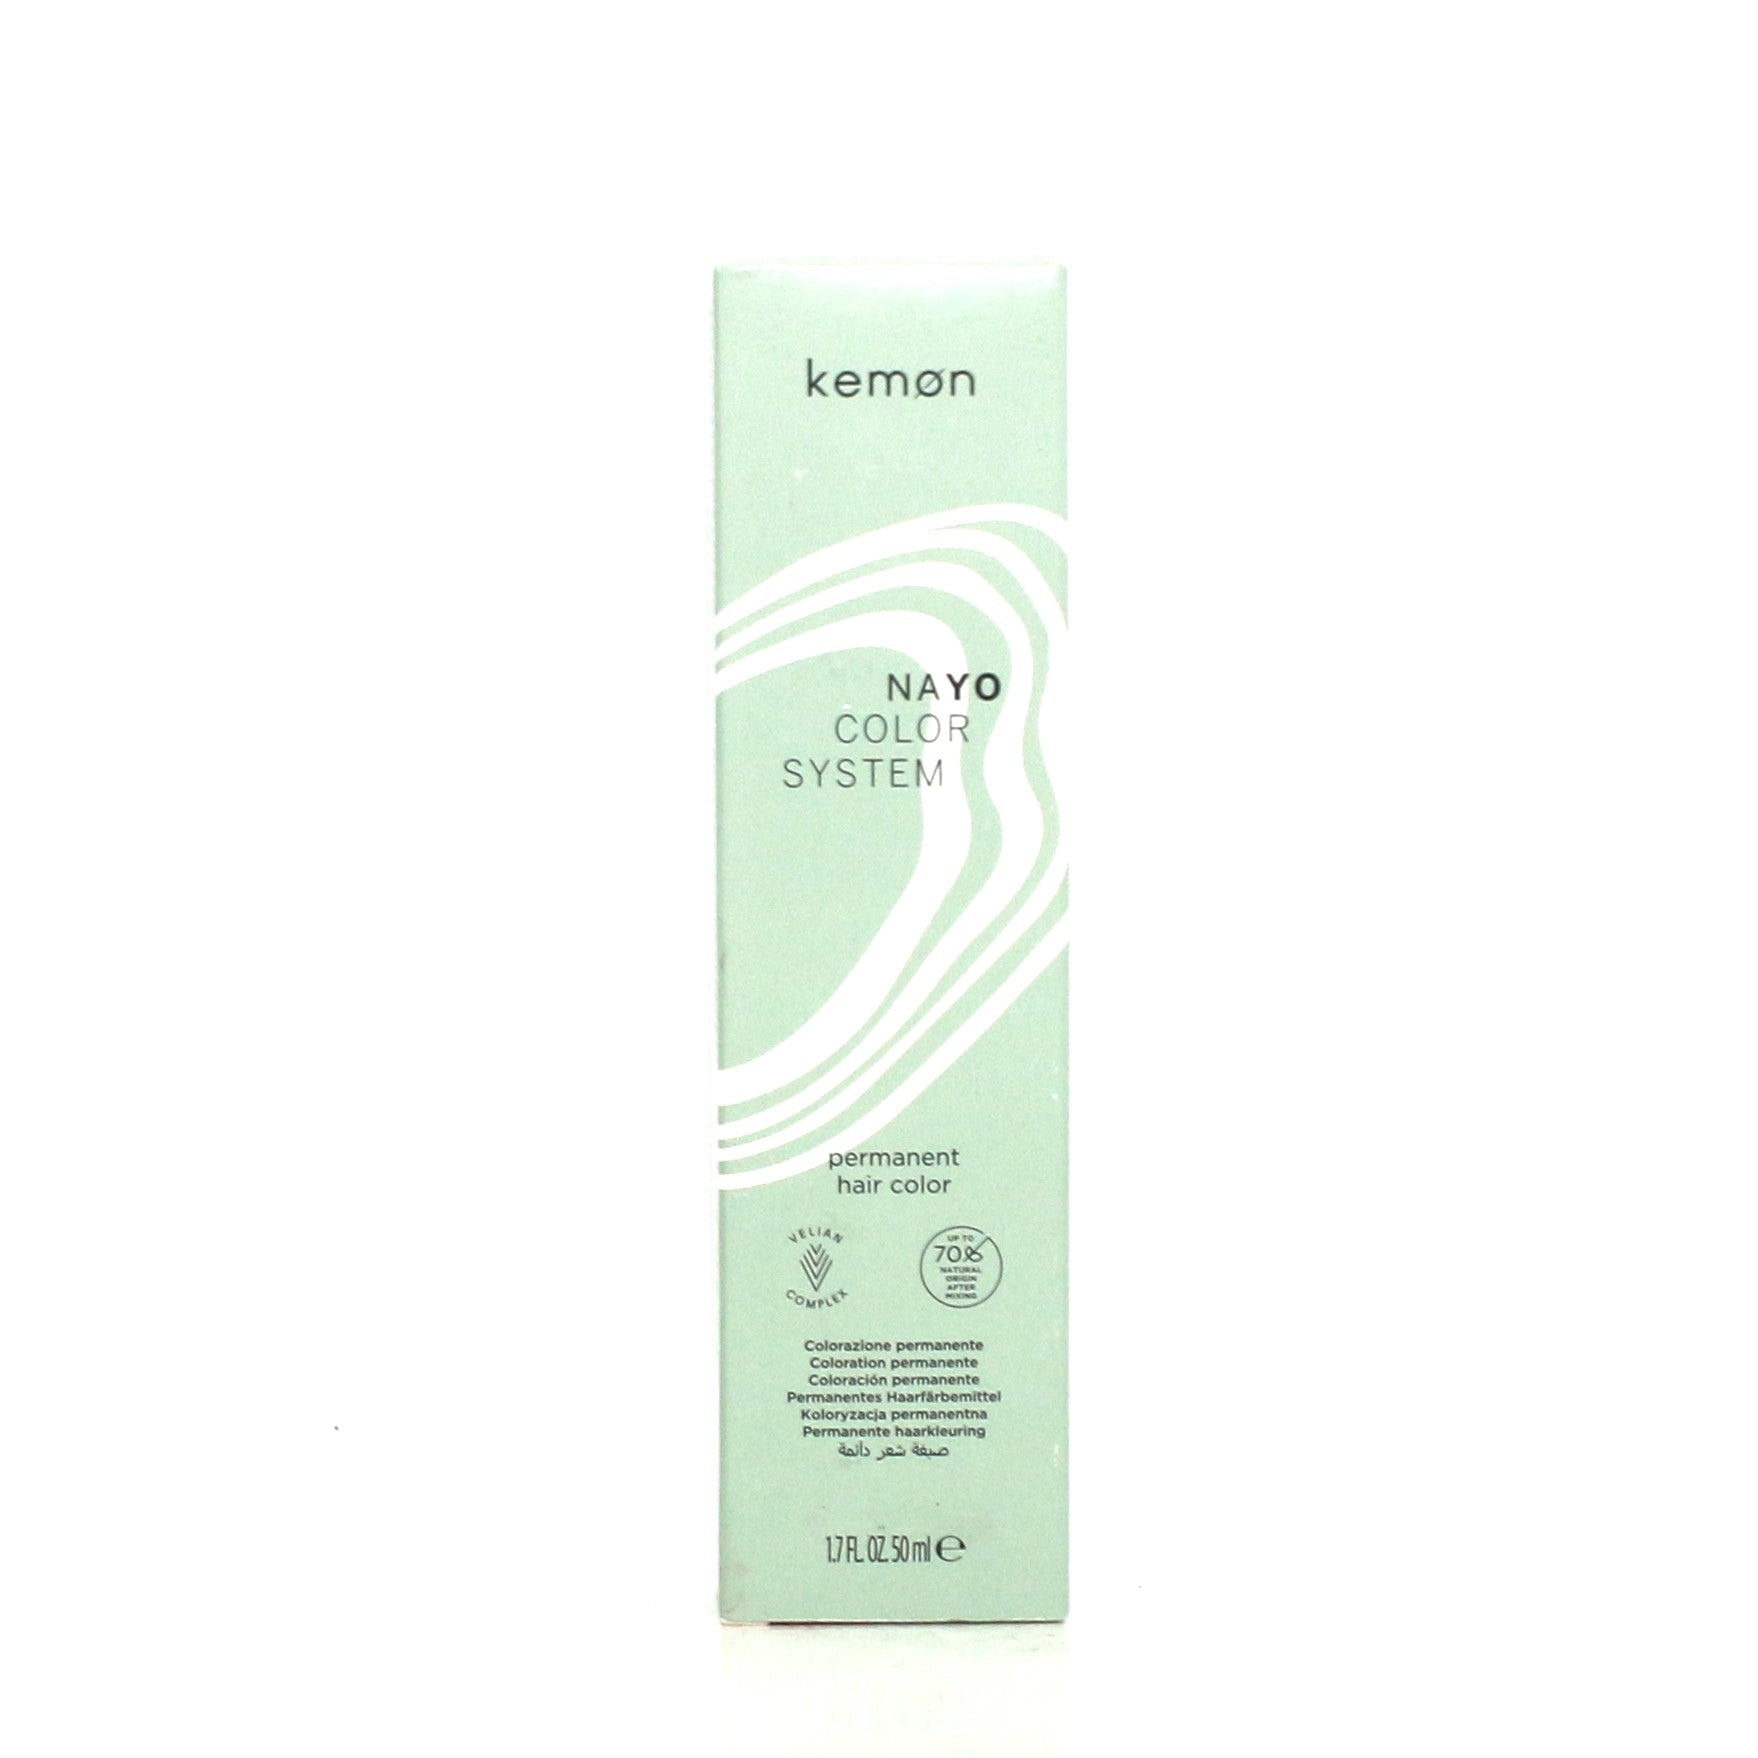 Kemon Nayo Color System Permanent Hair Color 1.7 oz